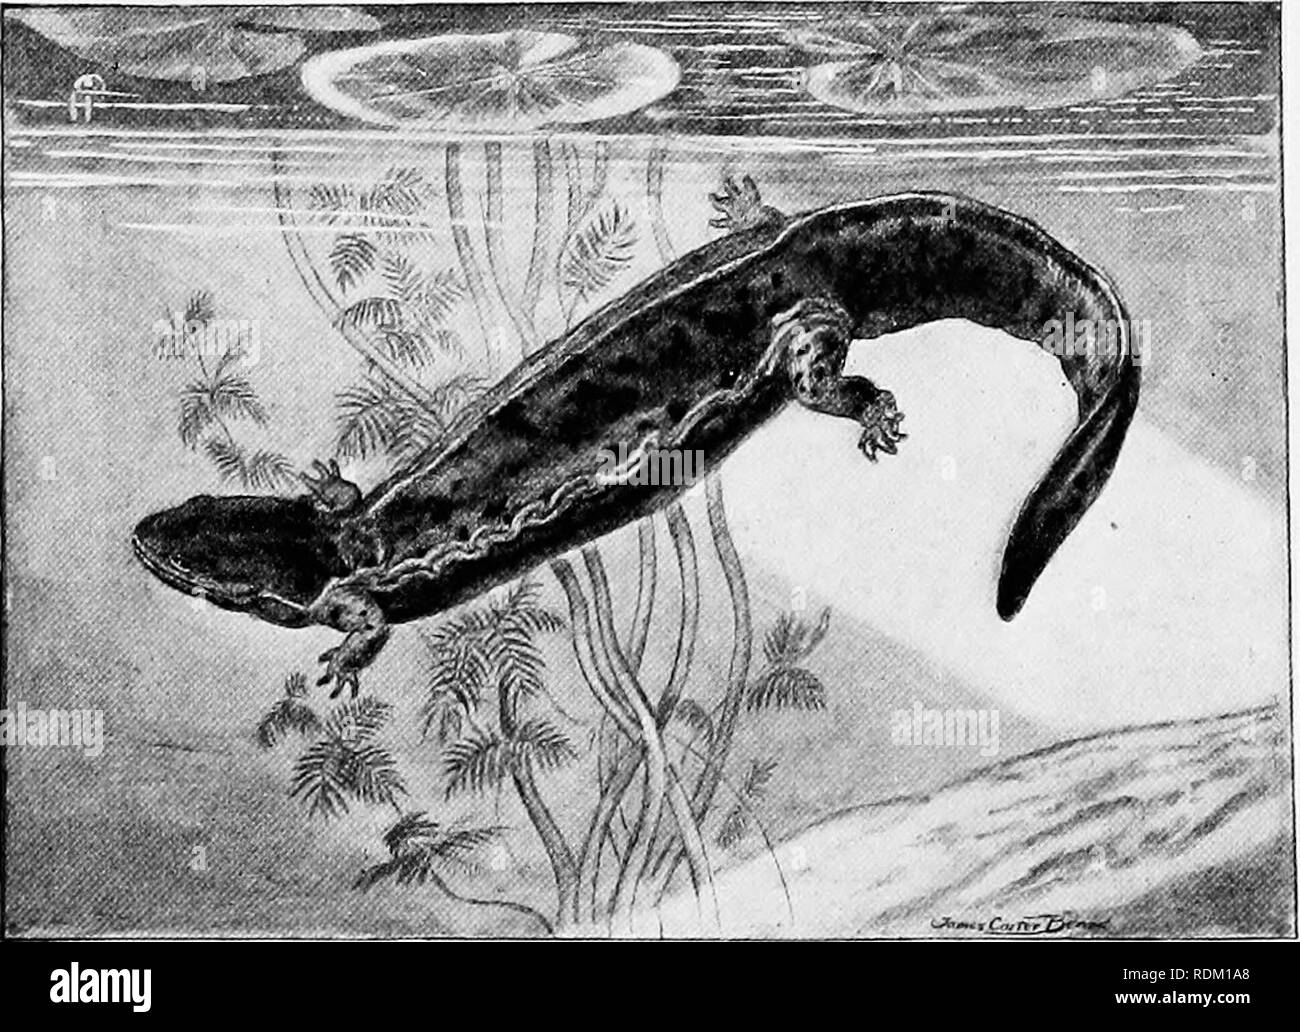 . The American natural history : a foundation of useful knowledge of the higher animals of North America . Natural history. 368 ORDERS OF AMPHIBIANS—TAILED AMPHIBIANS and the swift-running streams of the Dusky Salamander} Very frequently, salamanders are found un- derneath fallen trees, or stones, or under the bark of decaying logs; and on the western prairie farms the plough-share turns into the broad light of day many a burrowing amphibian. On the whole, the Spotted Salamander2 ap- pears to be the best species with which to intro- duce the North American group. It is distinctly marked, and o Stock Photo